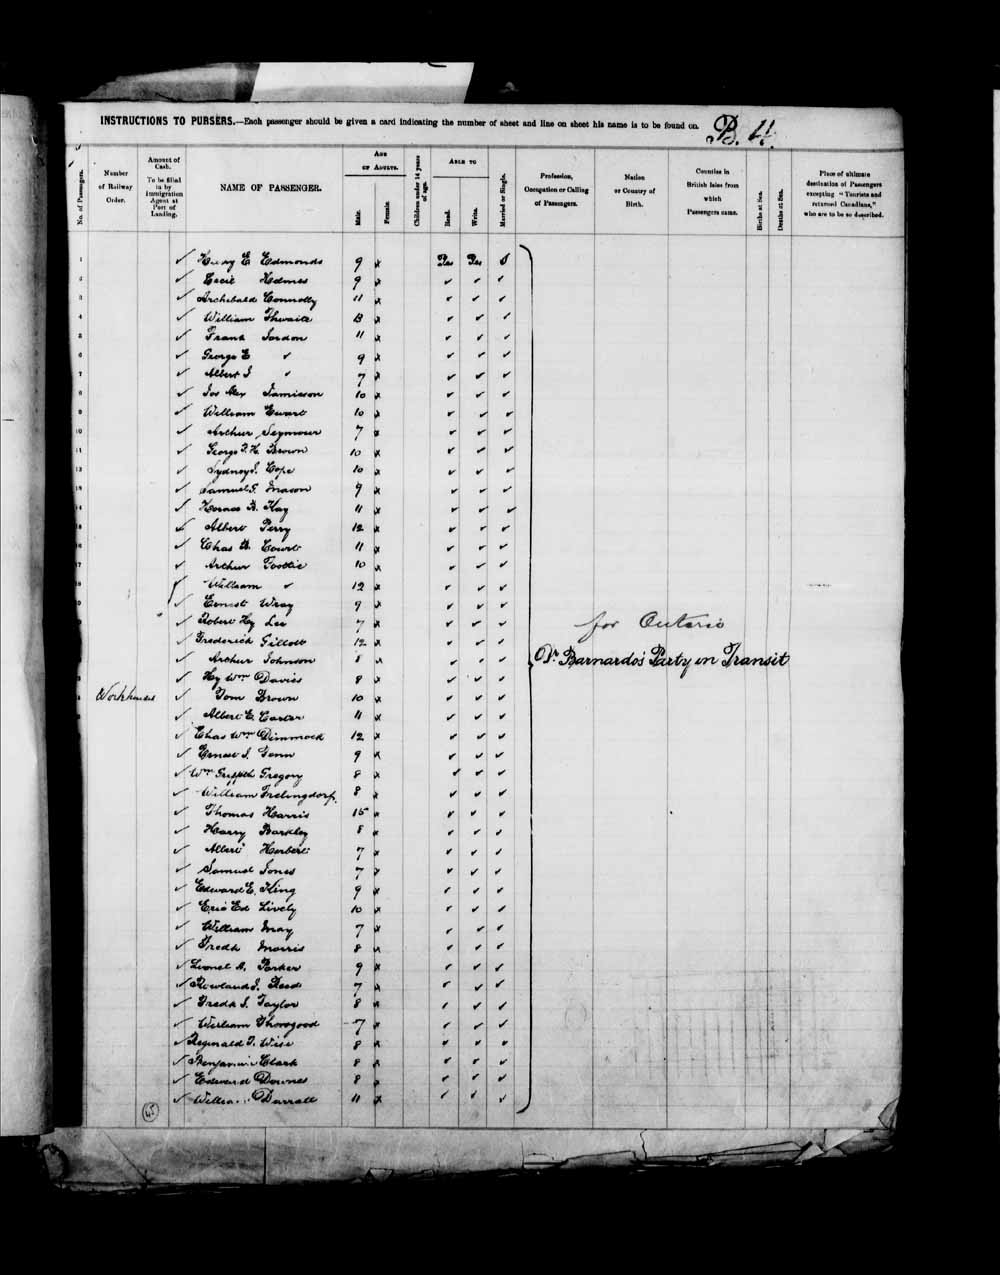 Digitized page of Passenger Lists for Image No.: e003658090